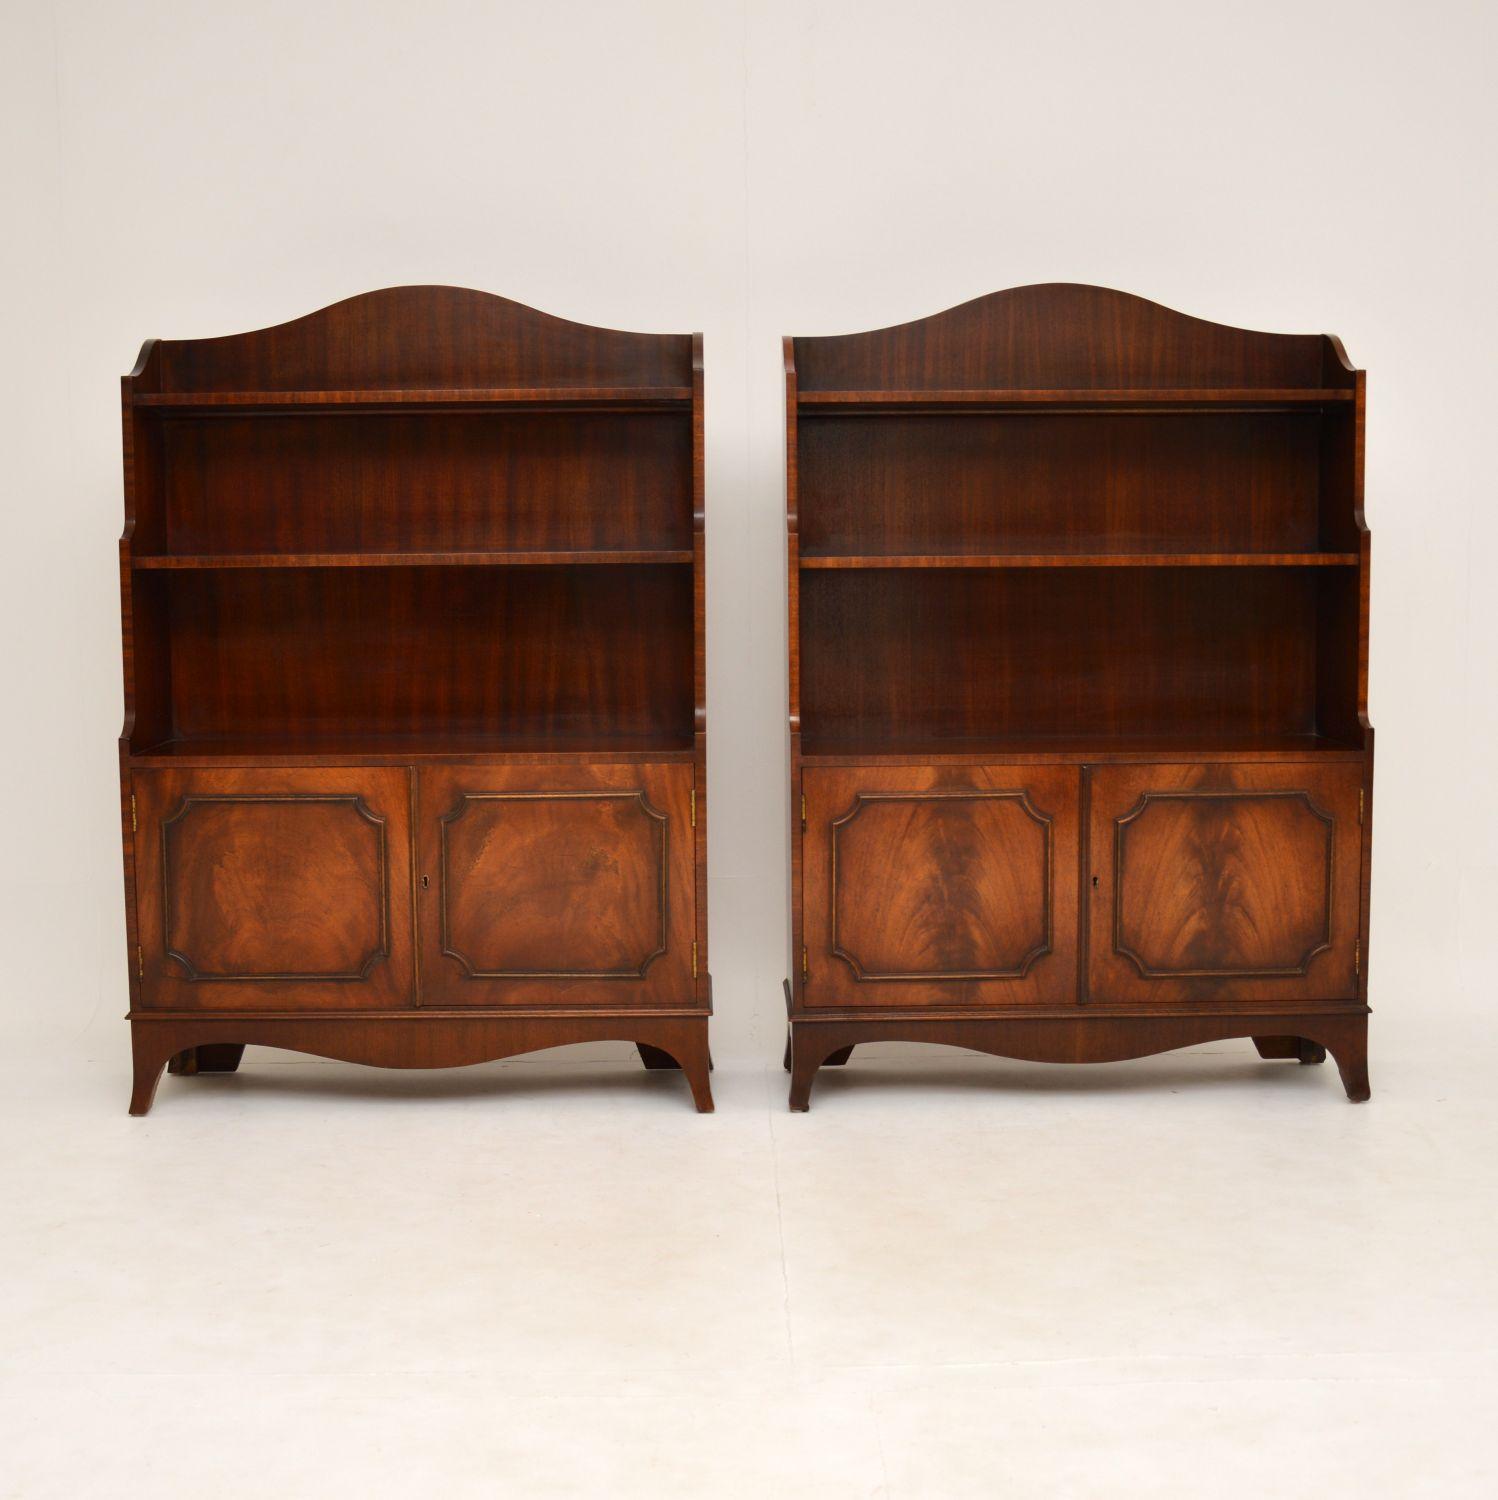 A smart and useful pair of waterfall shaped mahogany bookcases in the antique Georgian style. These date from around the 1950’s.

These bookcases are of super quality, and a lovely size. They have locking cabinets below, and fixed bookshelves in